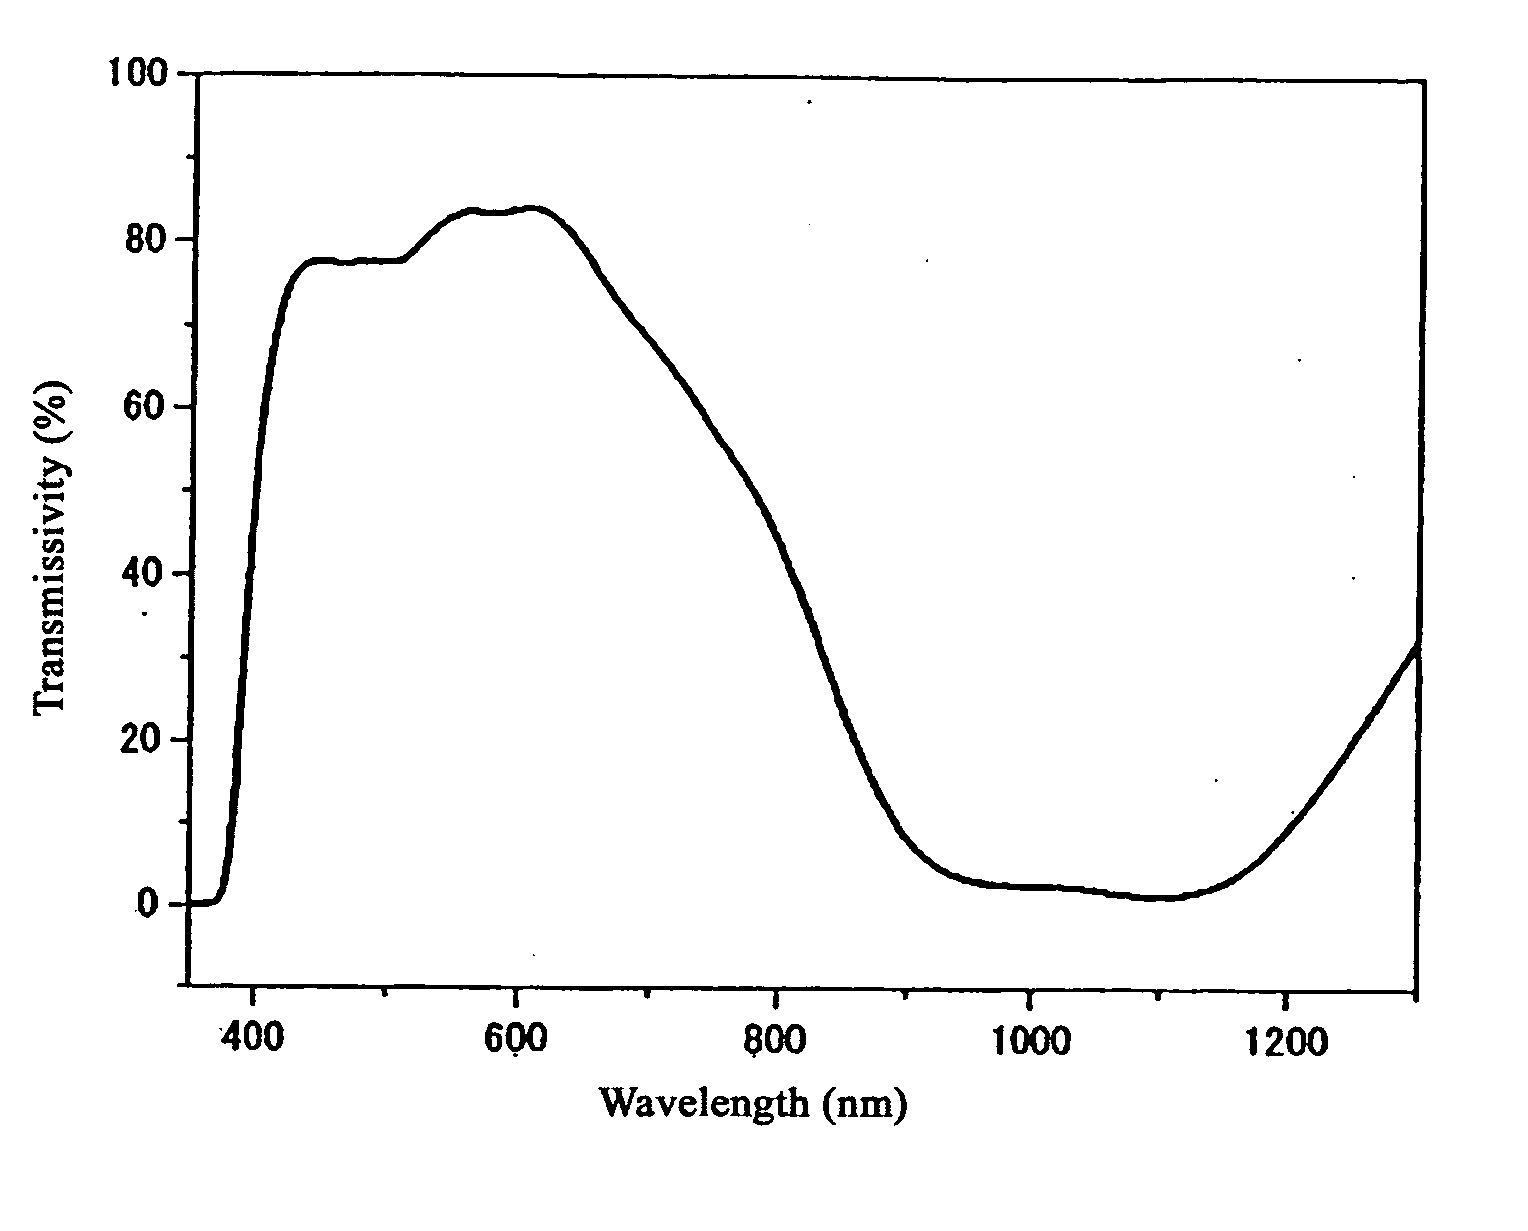 Coloring matter absorbing near-infrared light and filter for cutting off near-infrared ray